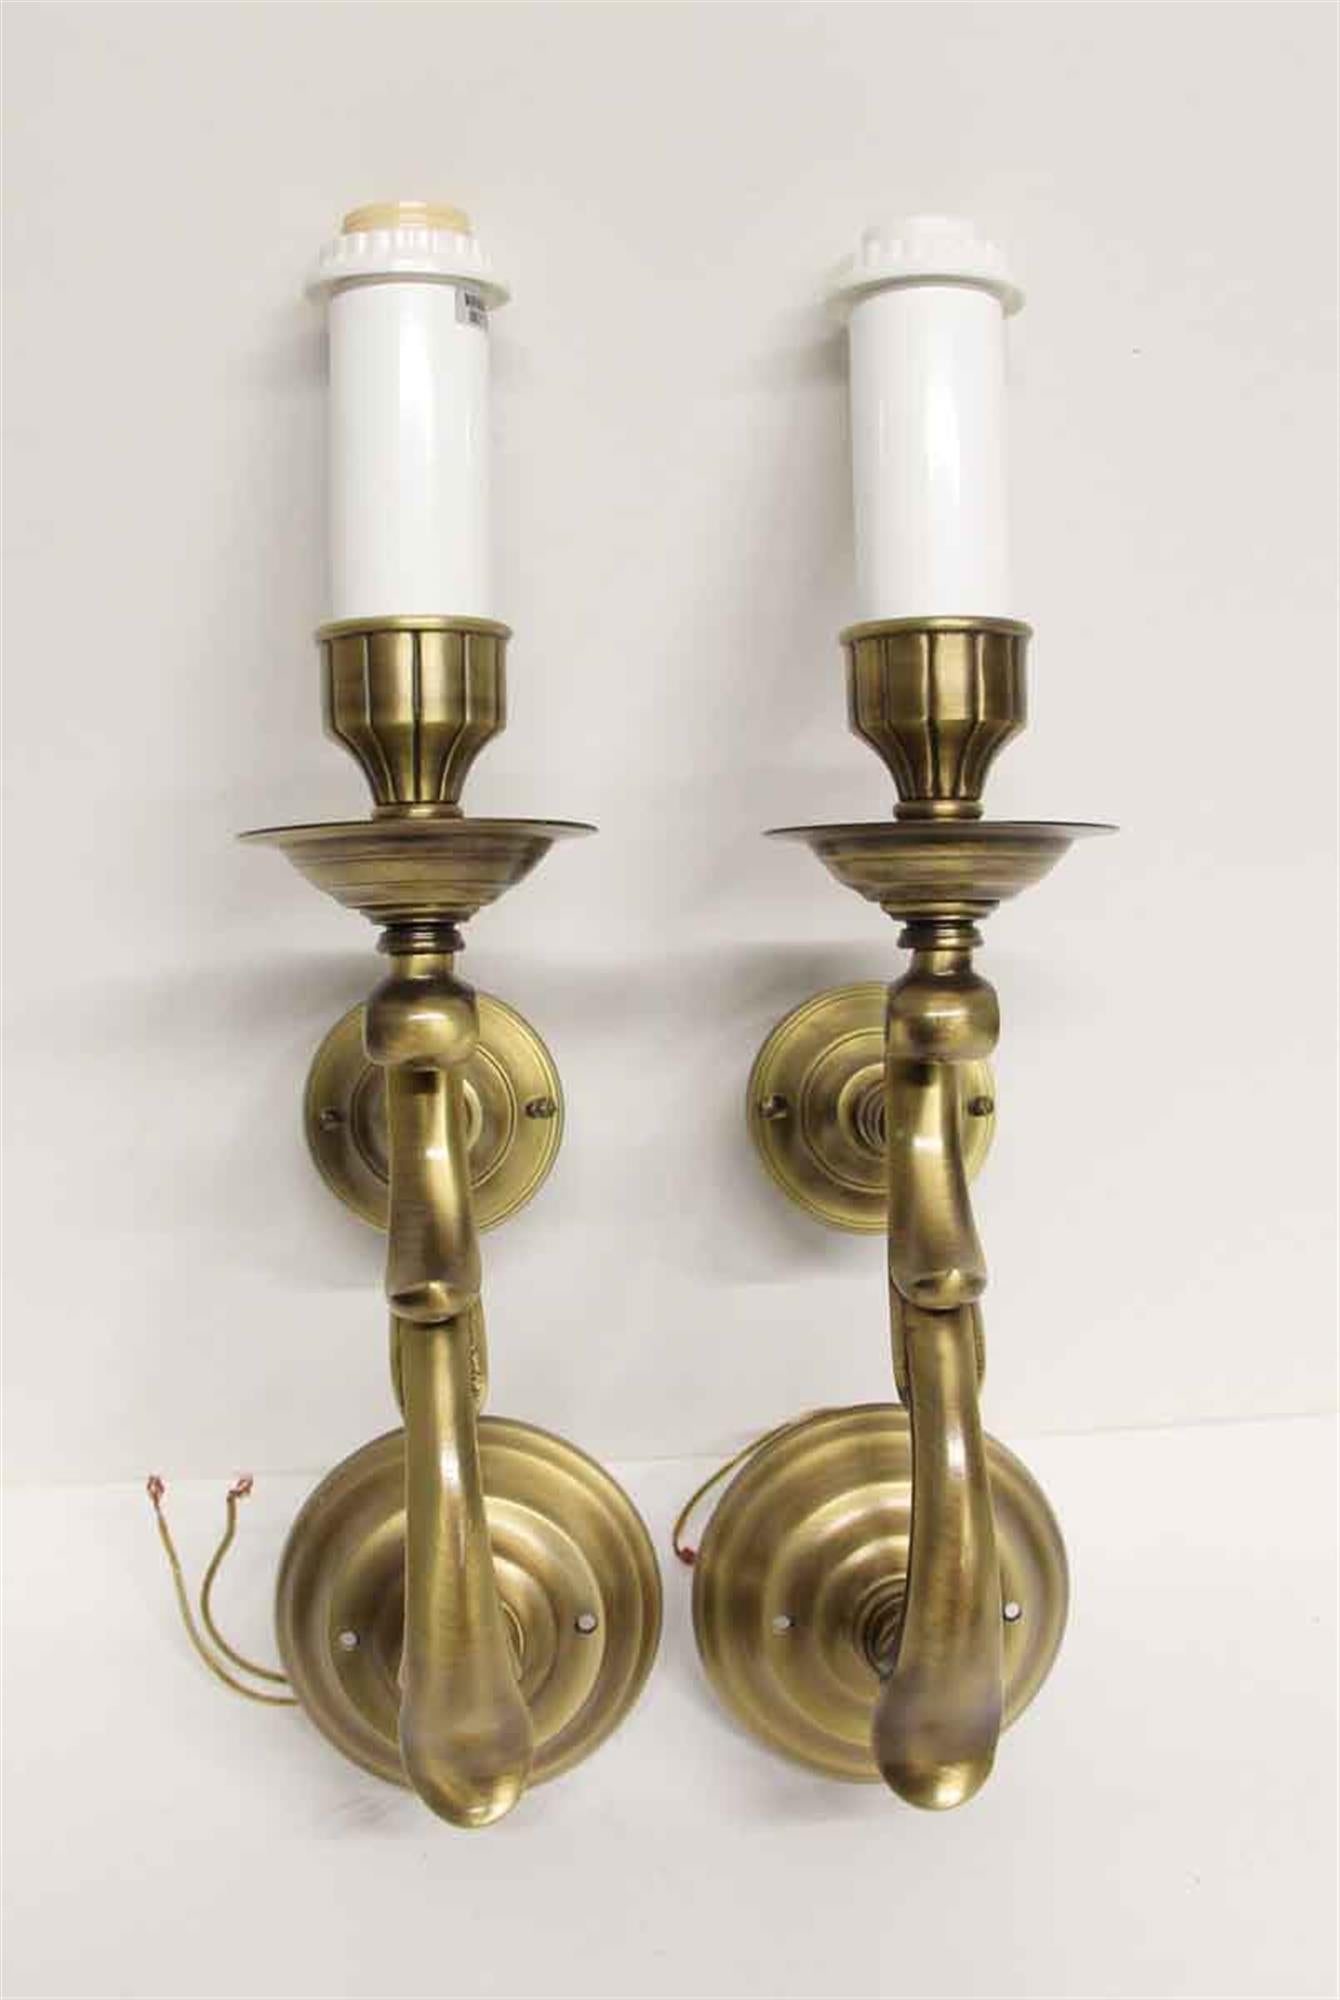 1980s pair of single arm brass sconces with an antique patina and black shades from the NYC Waldorf Astoria Hotel. A Waldorf Astoria authenticity card included with your purchase. This can be seen at our 400 Gilligan St location in Scranton, PA.